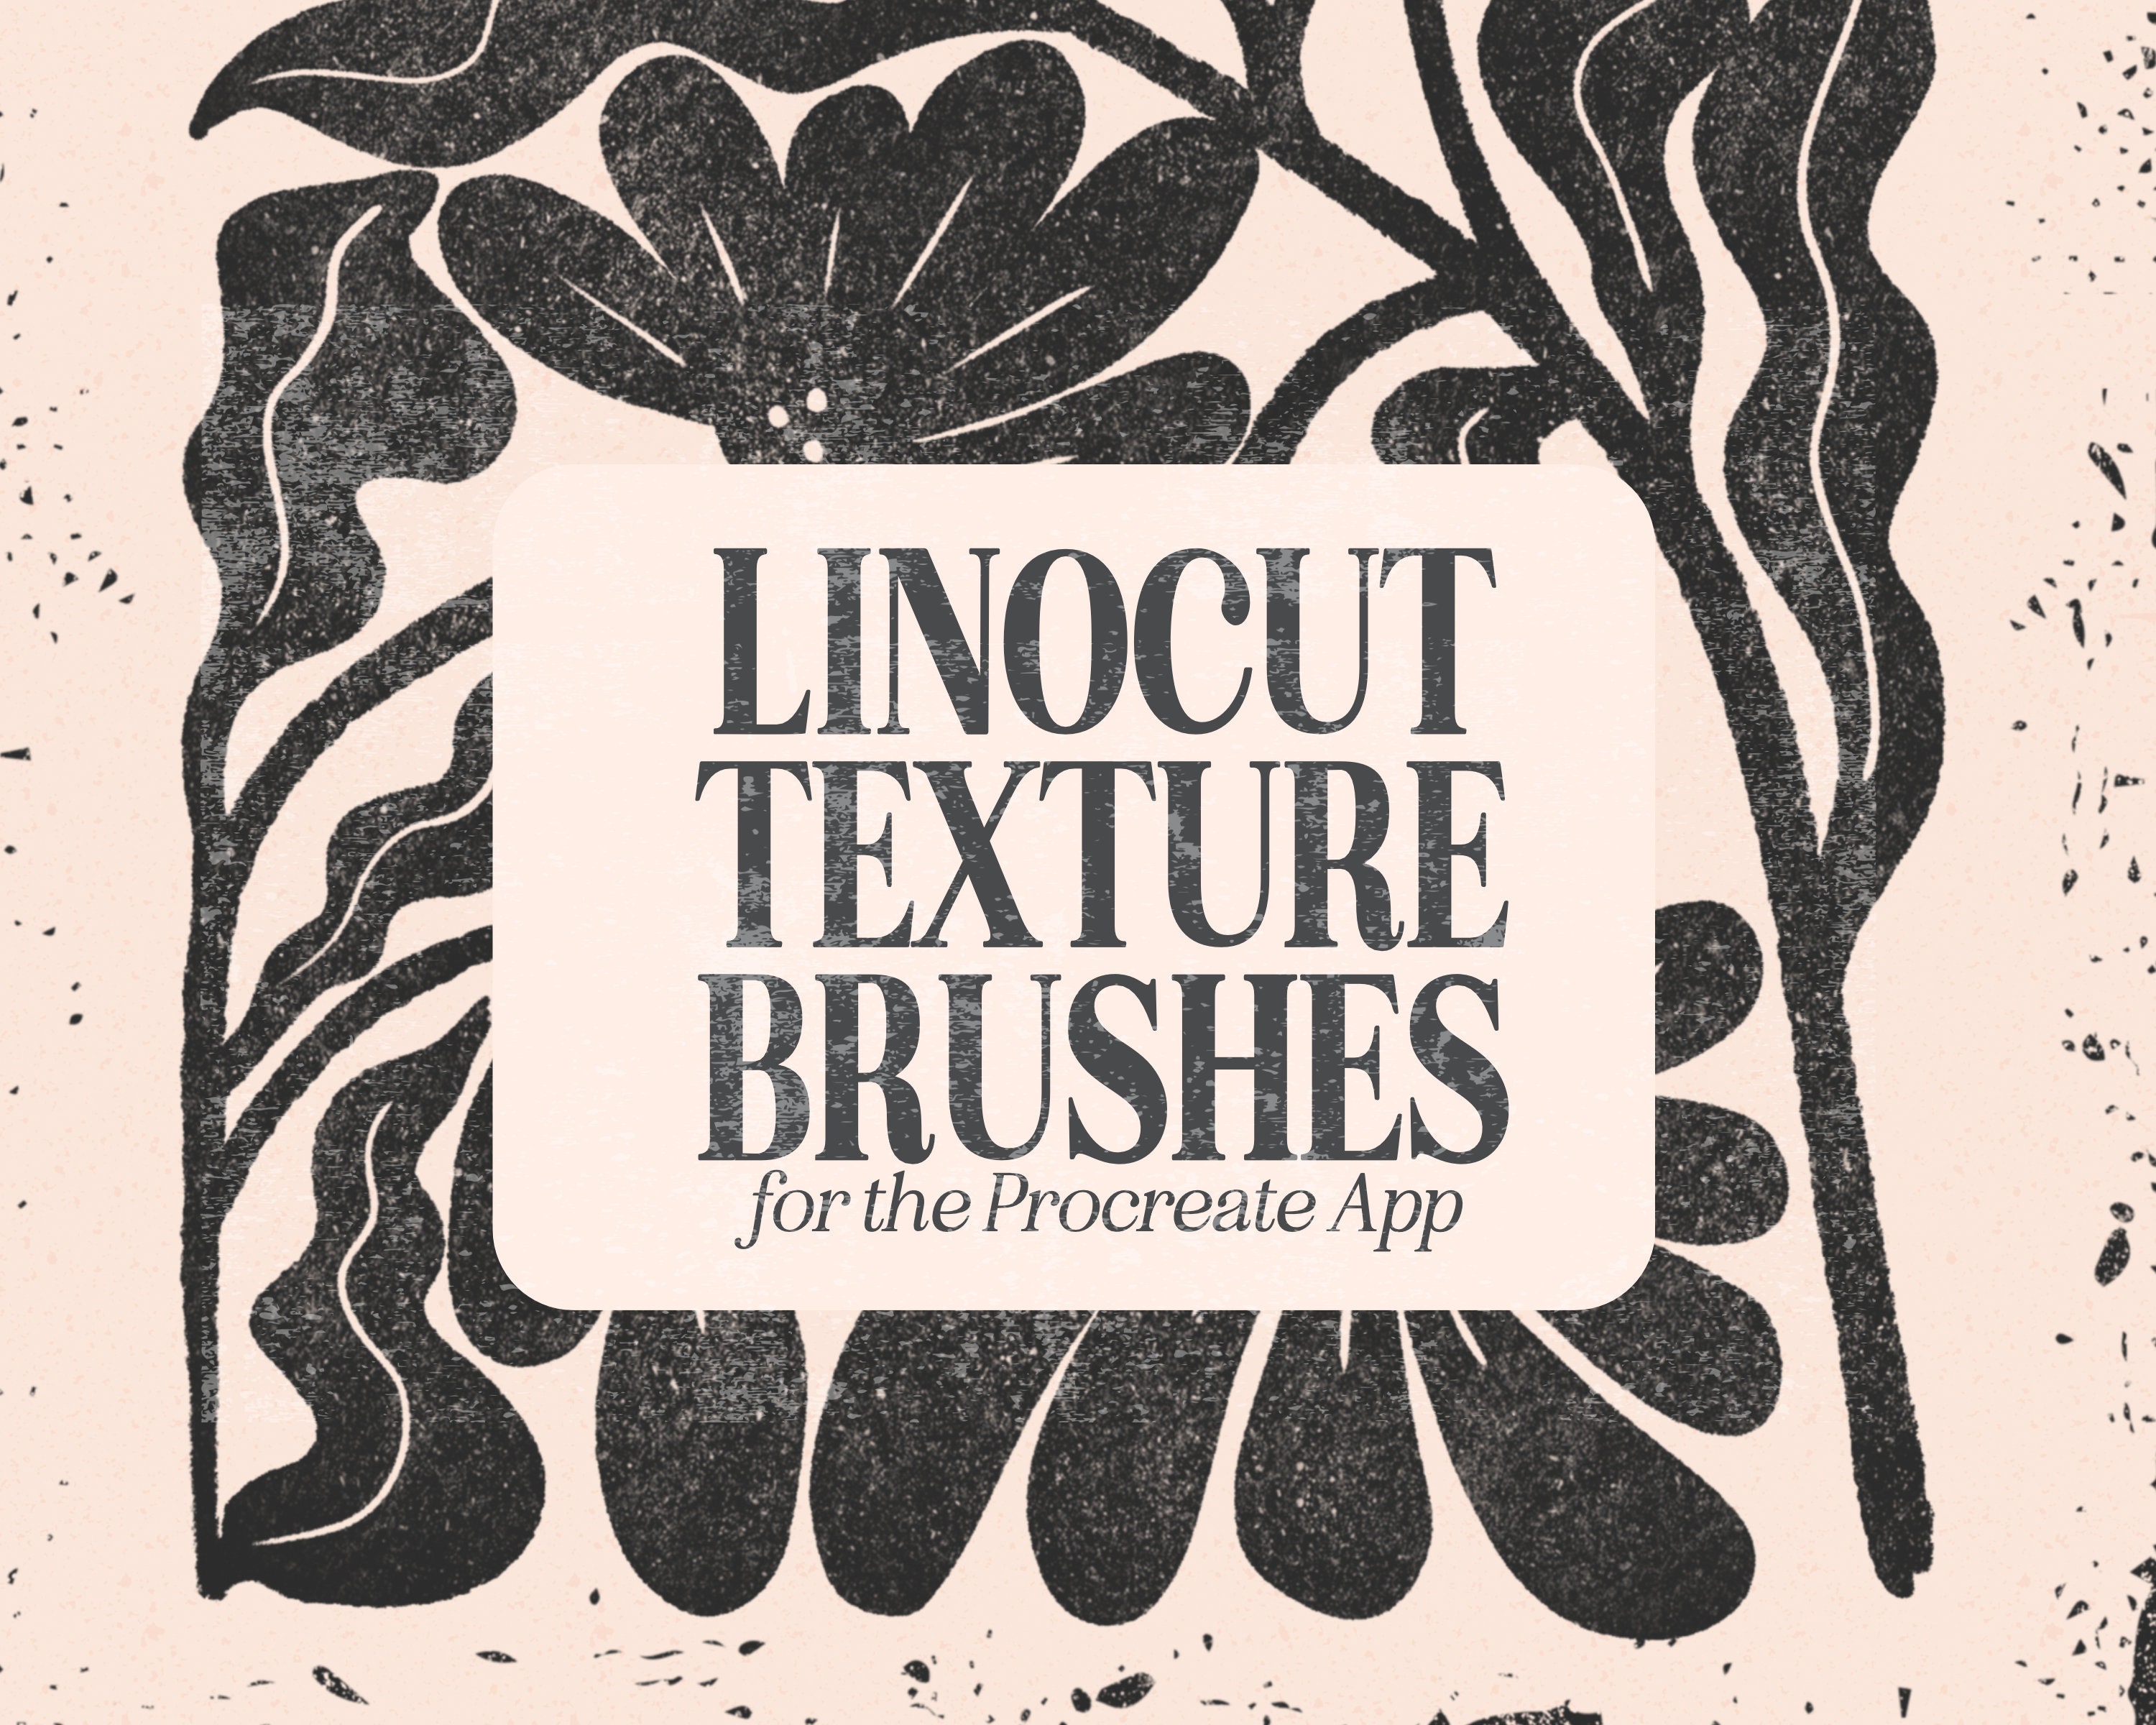 Photoshop Linocut Kit  Buy Linocut Patterns, Brushes, Styles, & Tools -  Artifex Forge